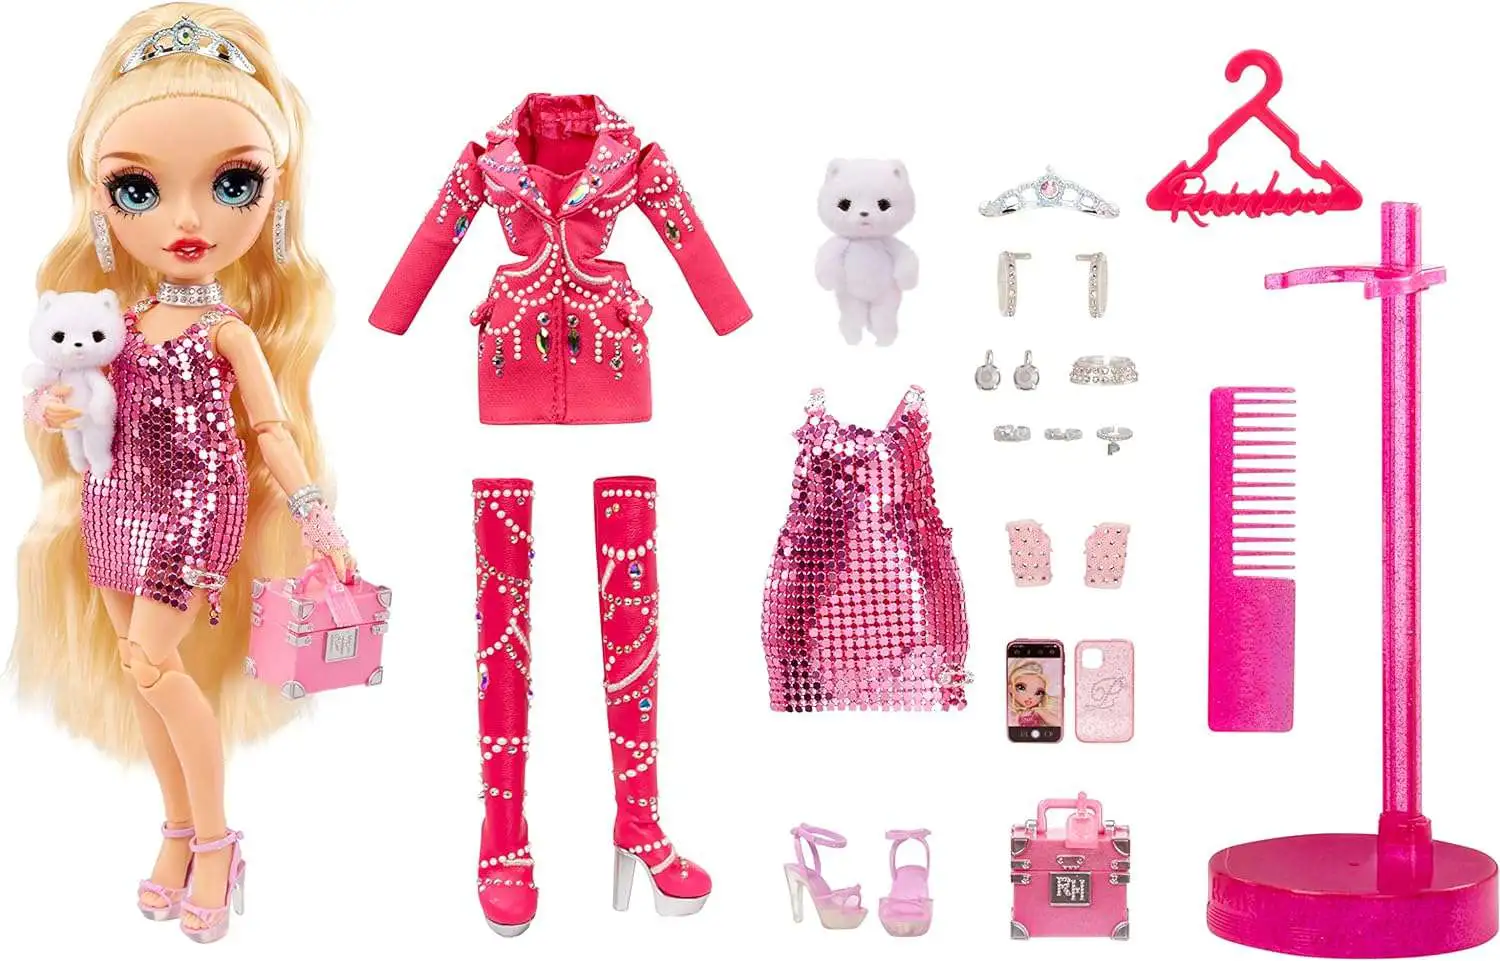 LIMITED EDITION Playmobil FASHION GIRL INFLUENCER WITH SPECIAL